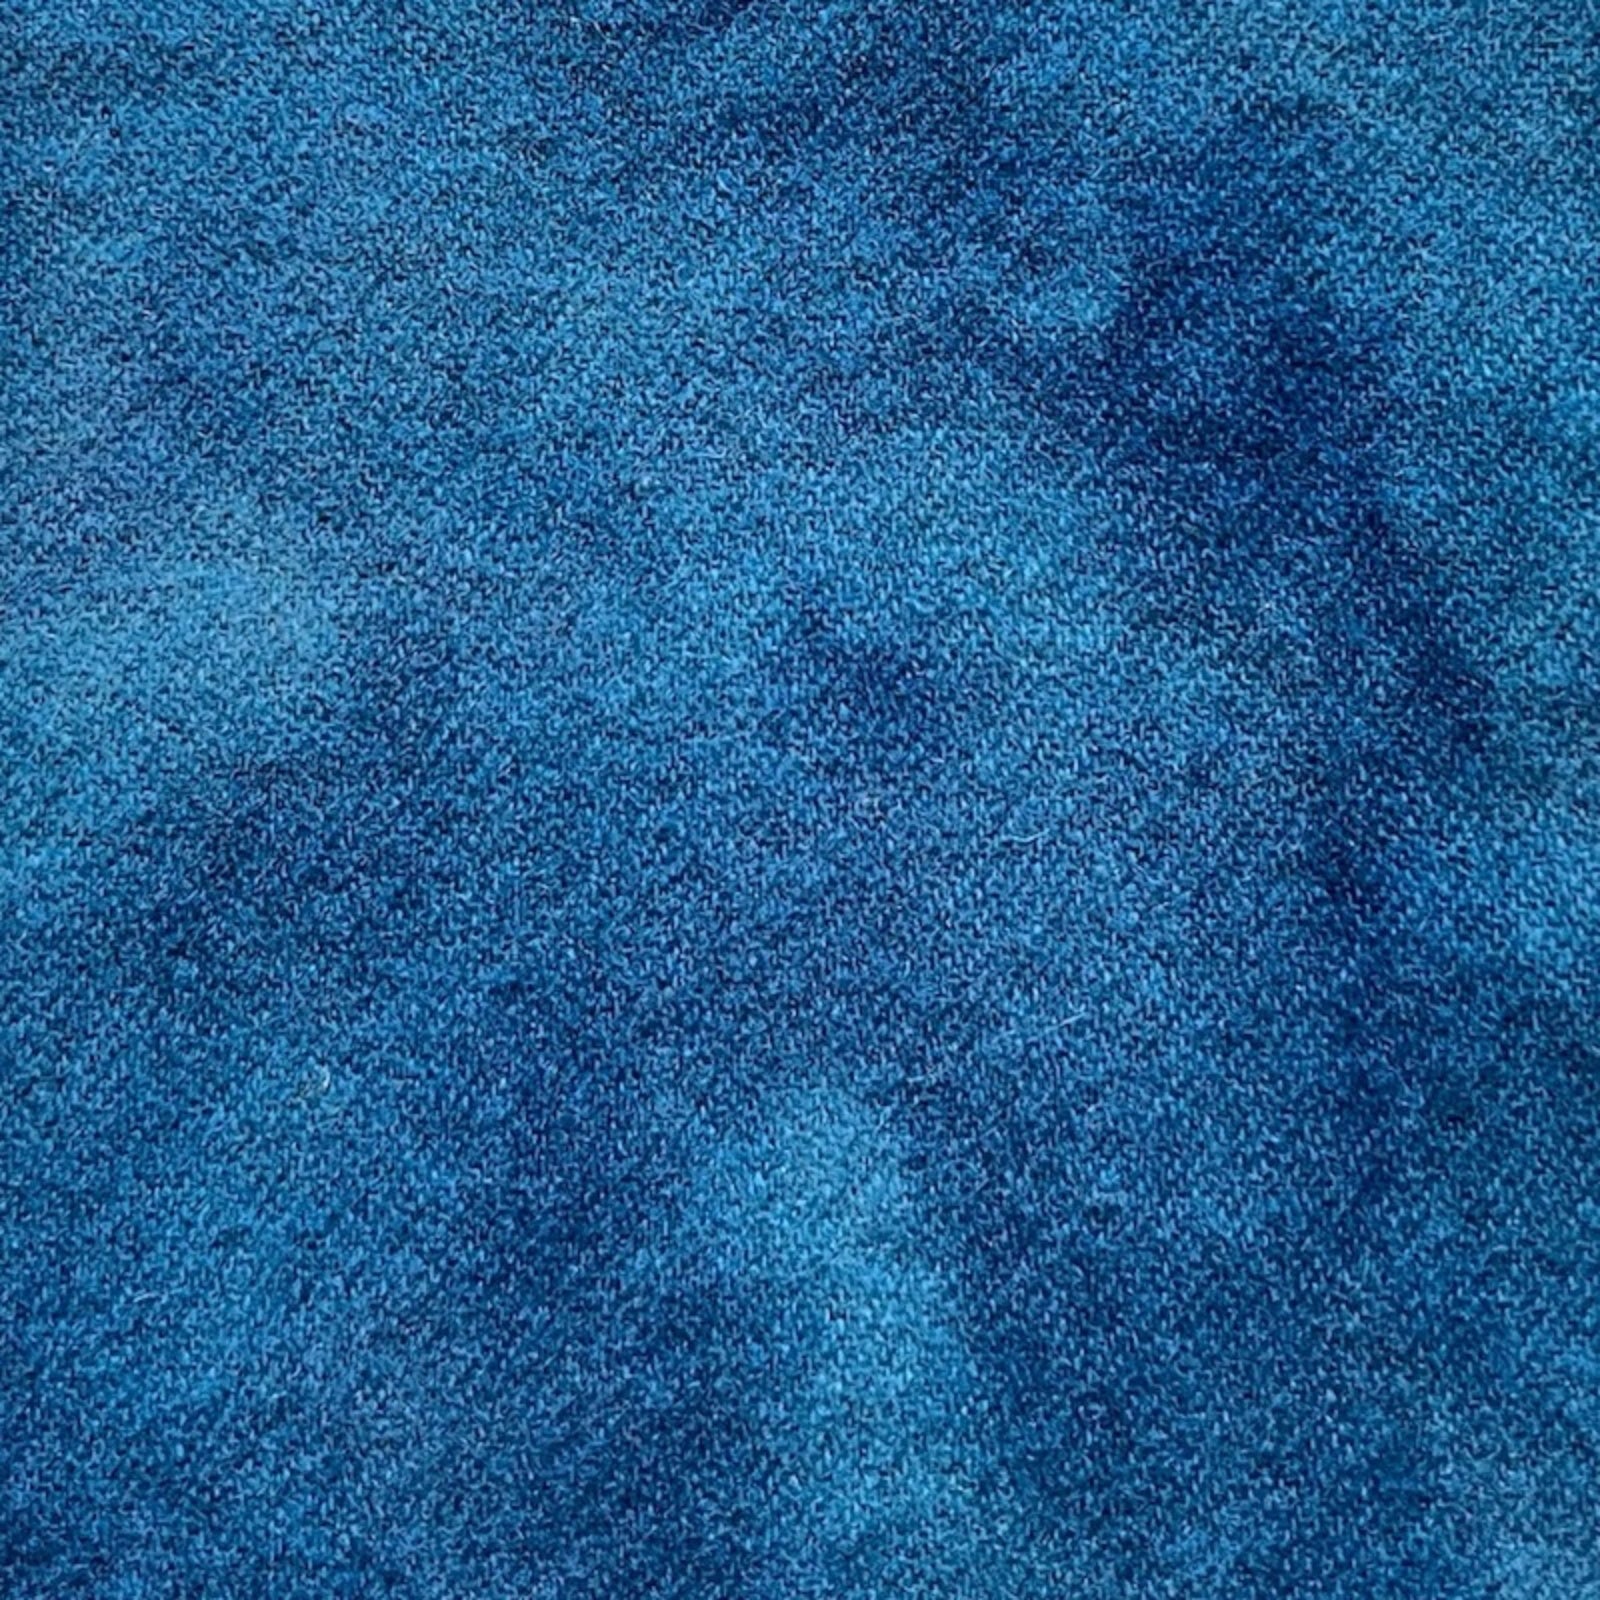 Teal Blue - Colorama Hand Dyed Wool - Offered by HoneyBee Hive Rug Hooking